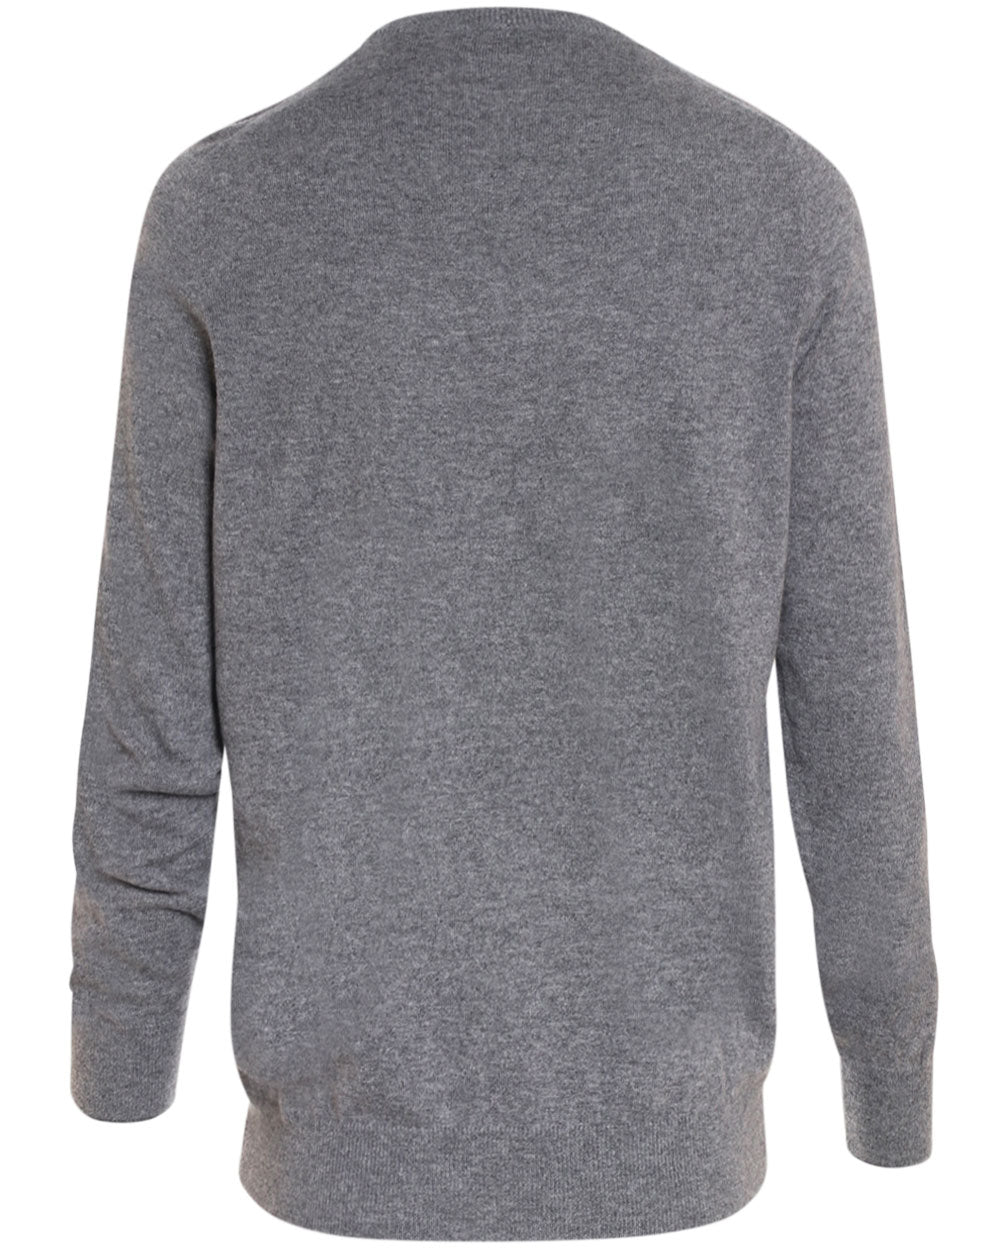 Charcoal Cashmere V-Neck Sweater